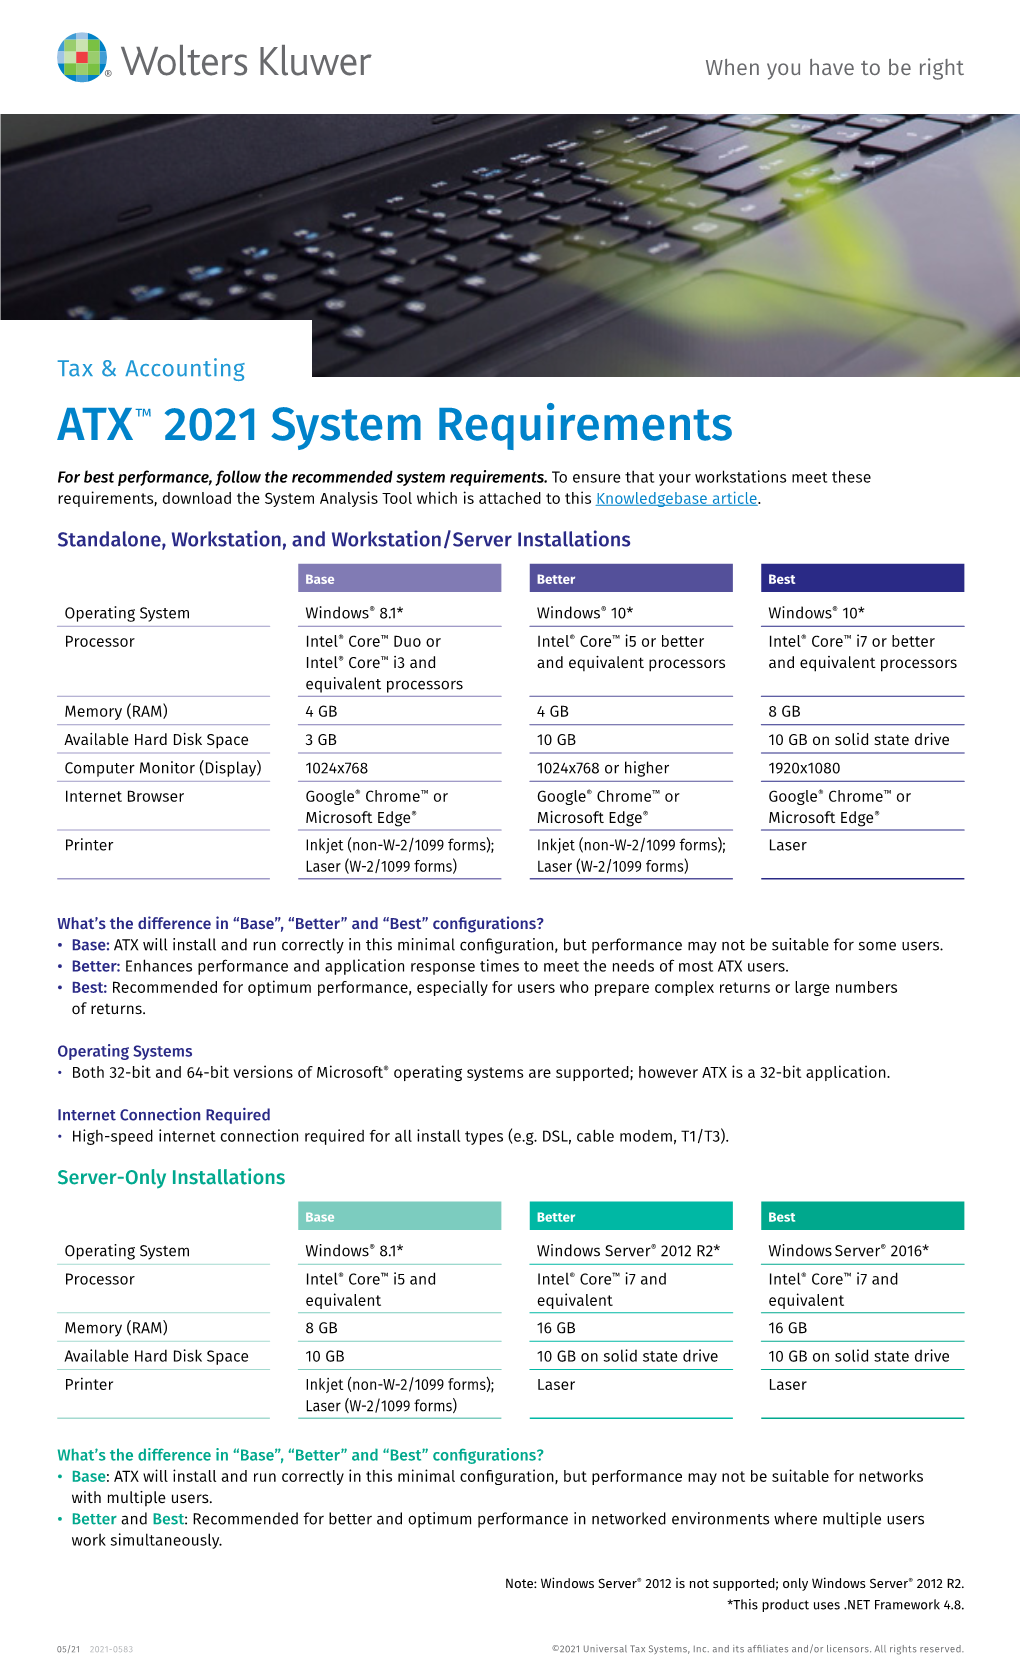 ATX System Requirements